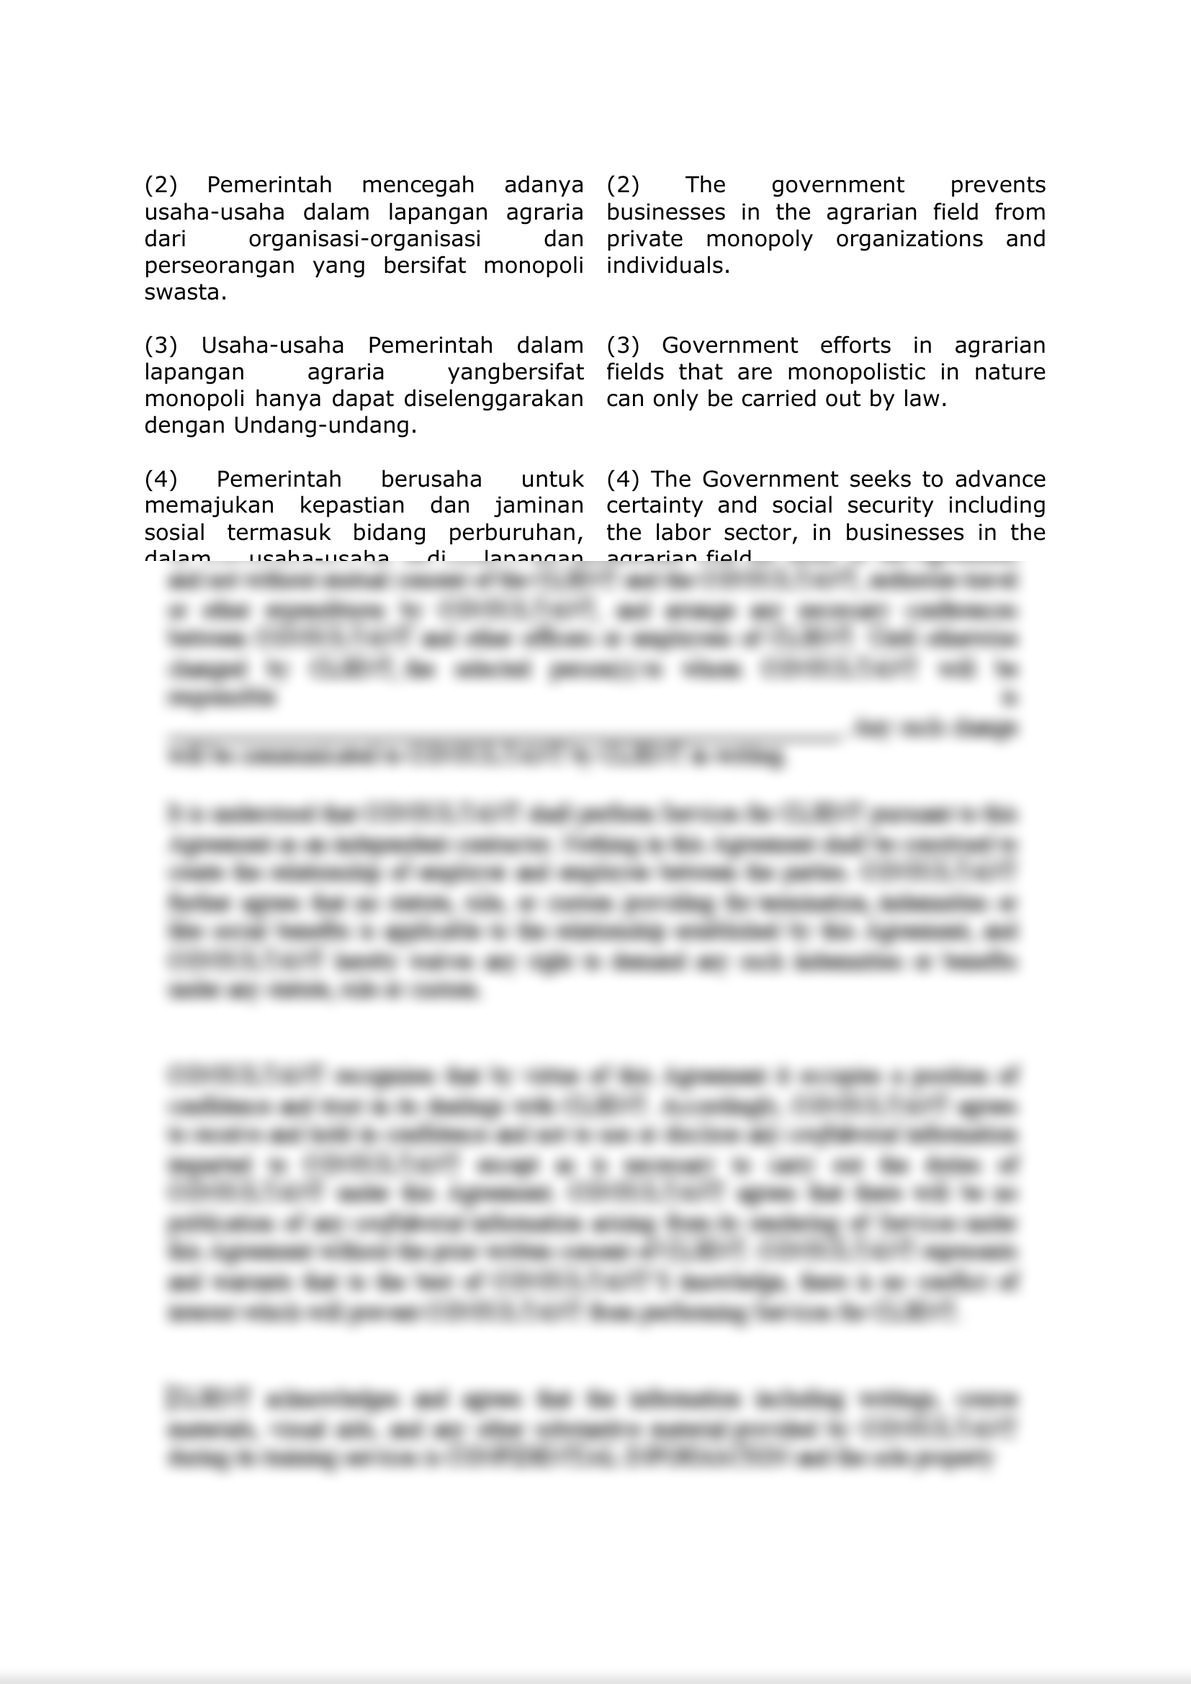 Law of the Republic of Indonesia Number: 5 of 1960 Concerning Basic Regulations on Agrarian Principles-5